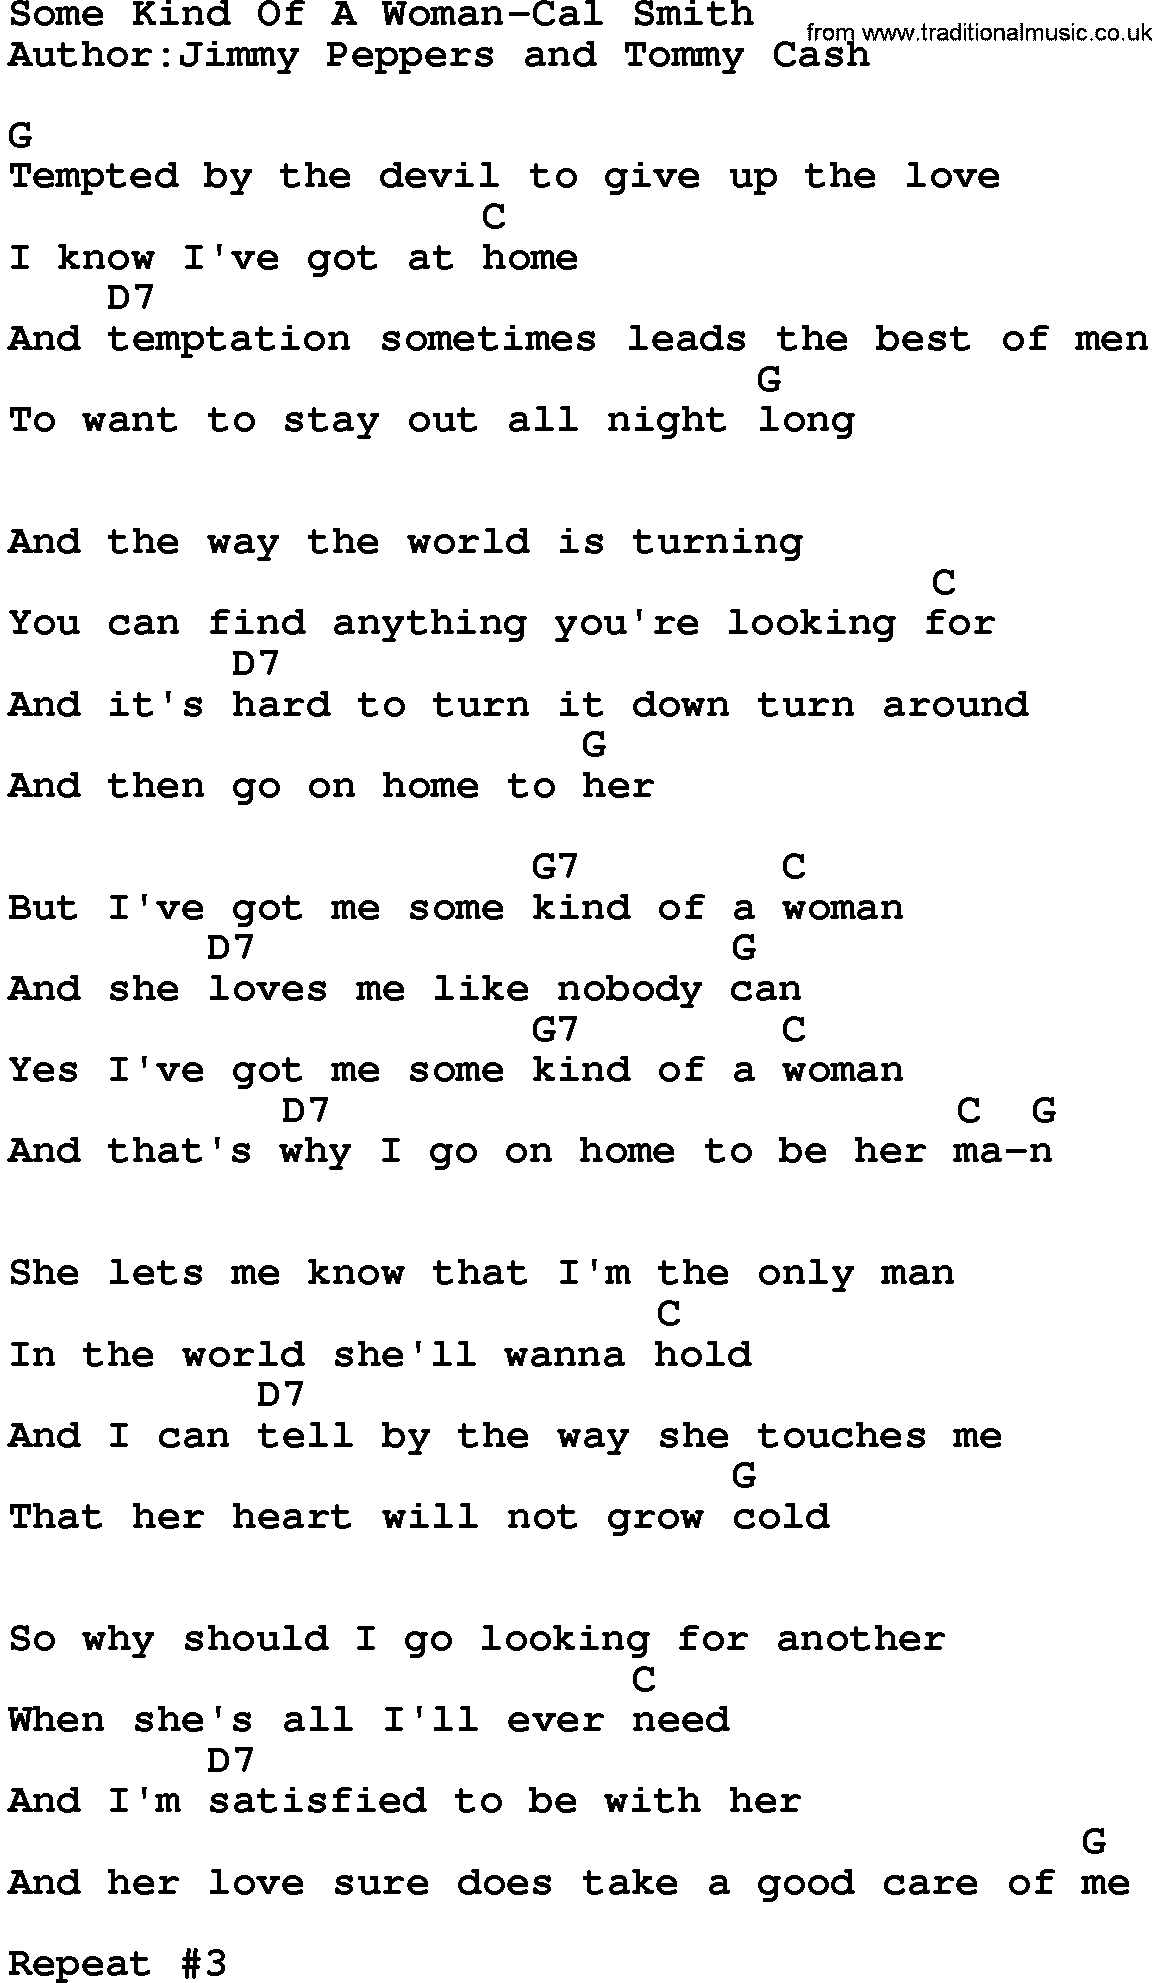 Country music song: Some Kind Of A Woman-Cal Smith lyrics and chords